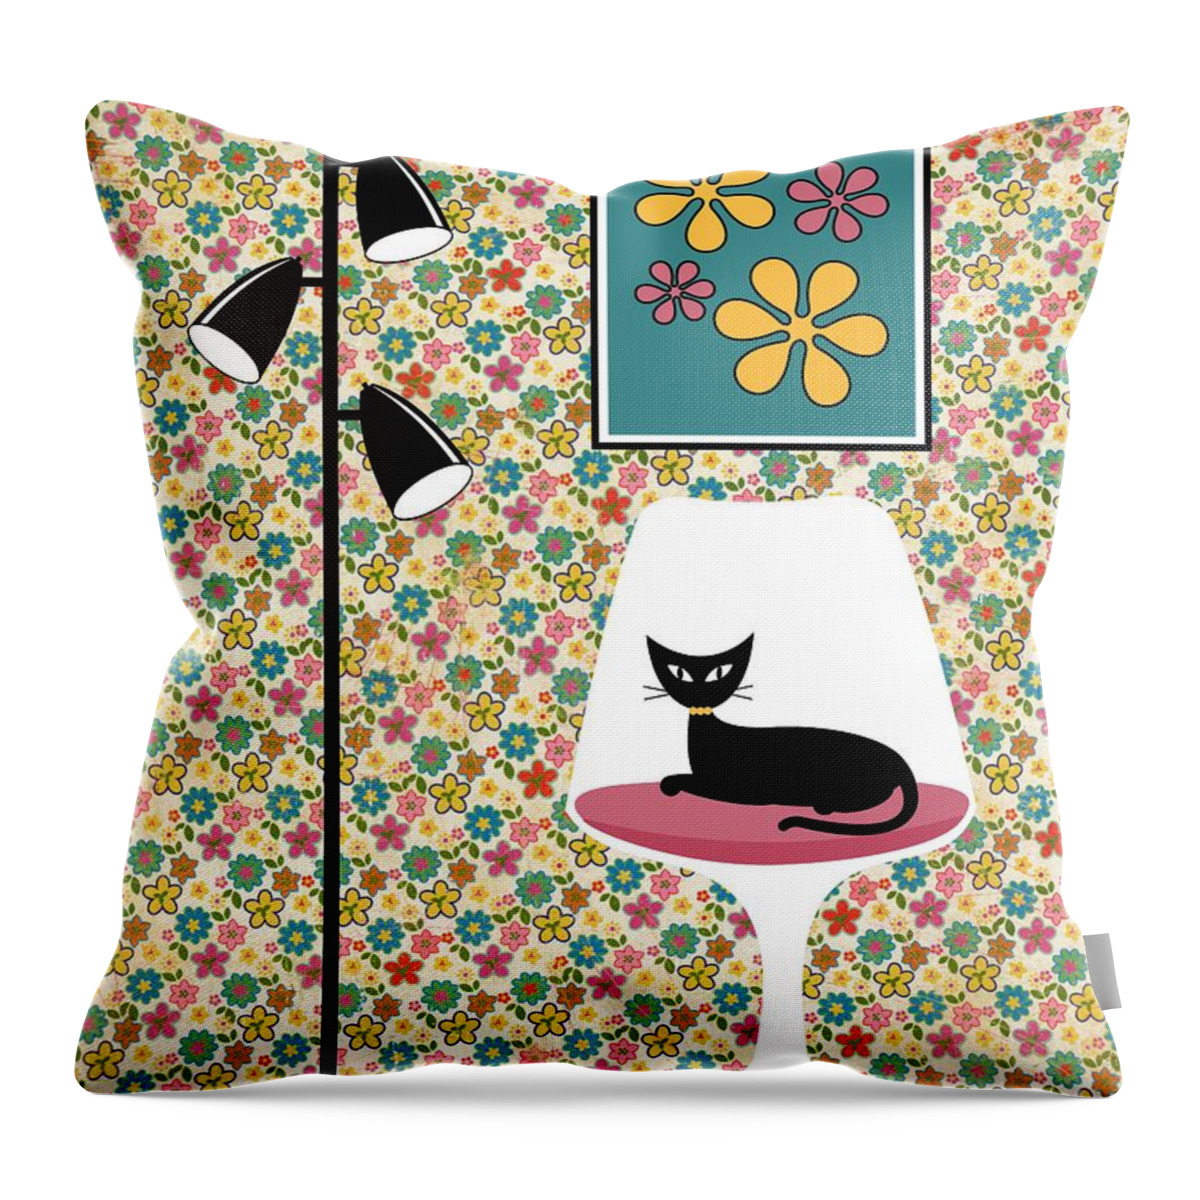 Mid Century Modern Throw Pillow featuring the digital art Mod Wallpaper in Floral by Donna Mibus